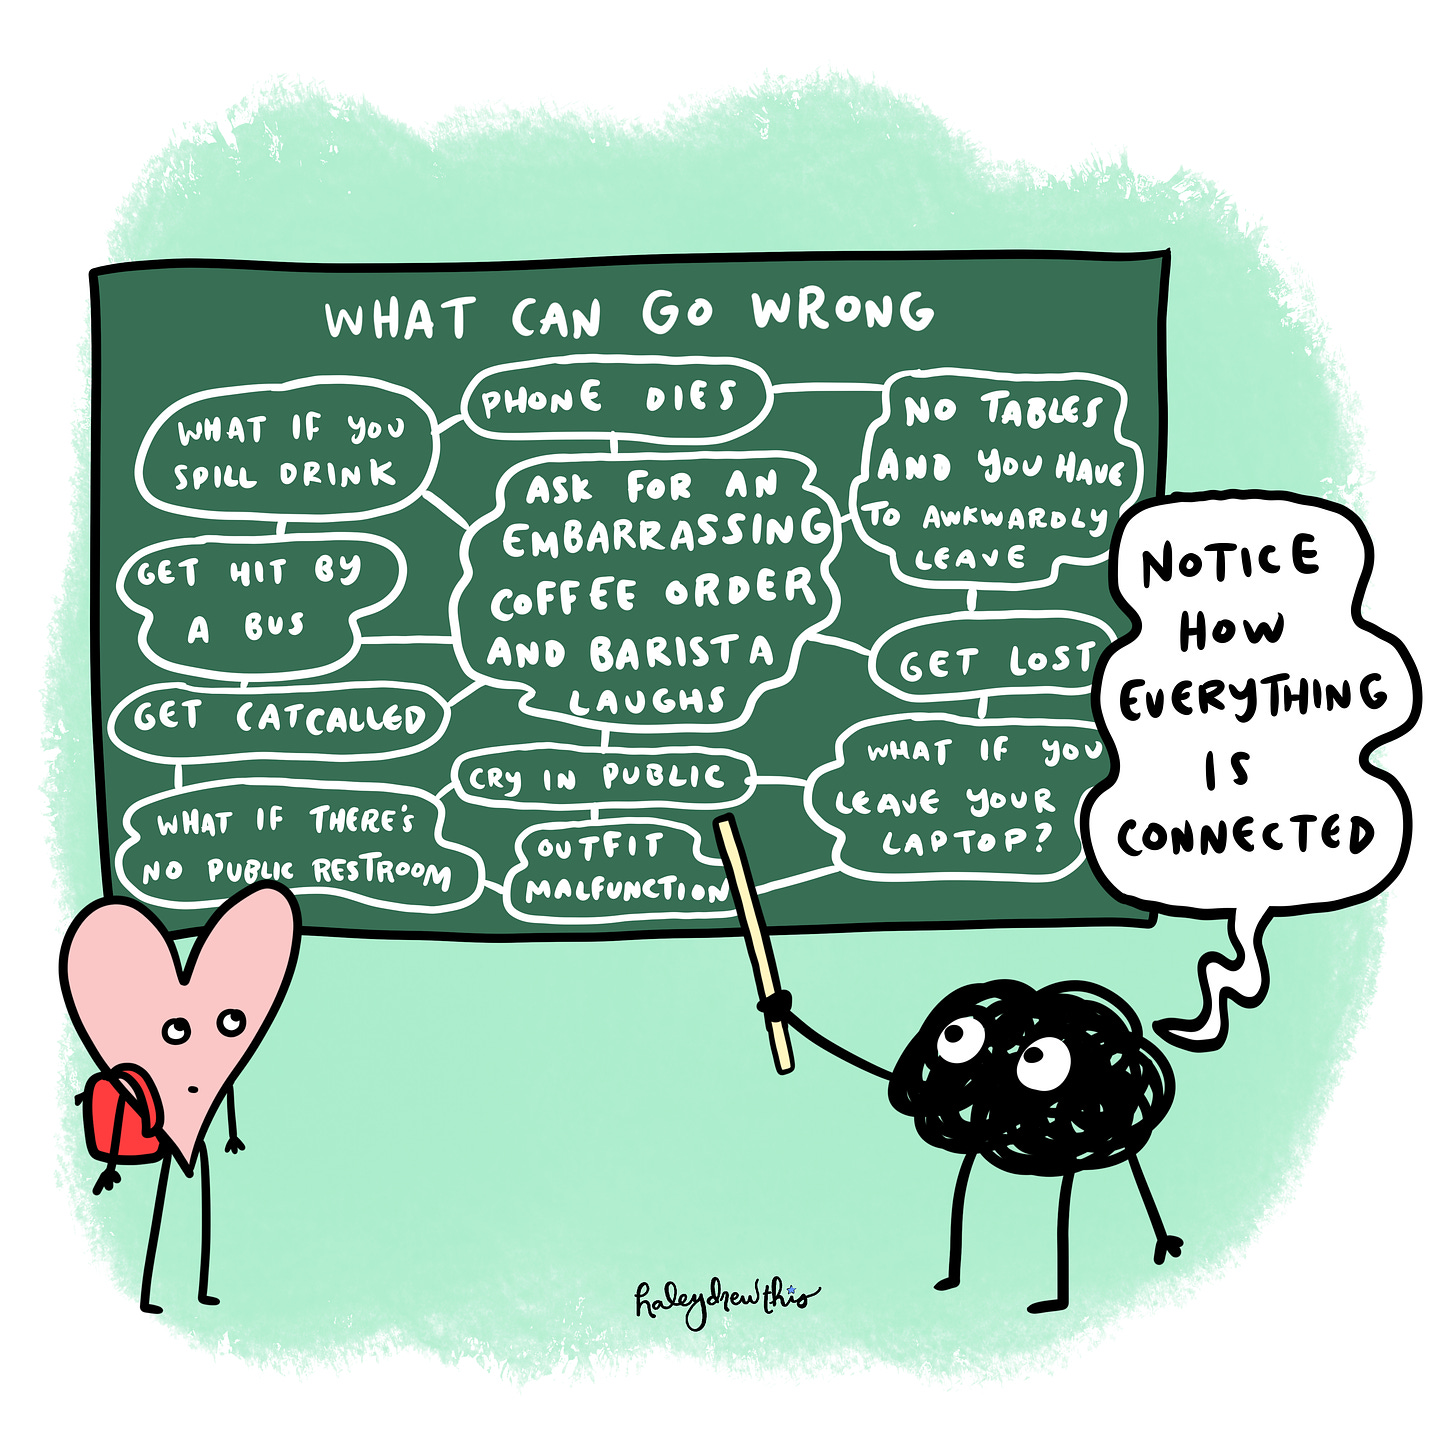 A chalkboard with a conspiracy-theory-style flow chart reads things like “what if we get catcalled” or “cry in public.” Anxiety points to these with a ruler and says, “notice how everything is connected.”